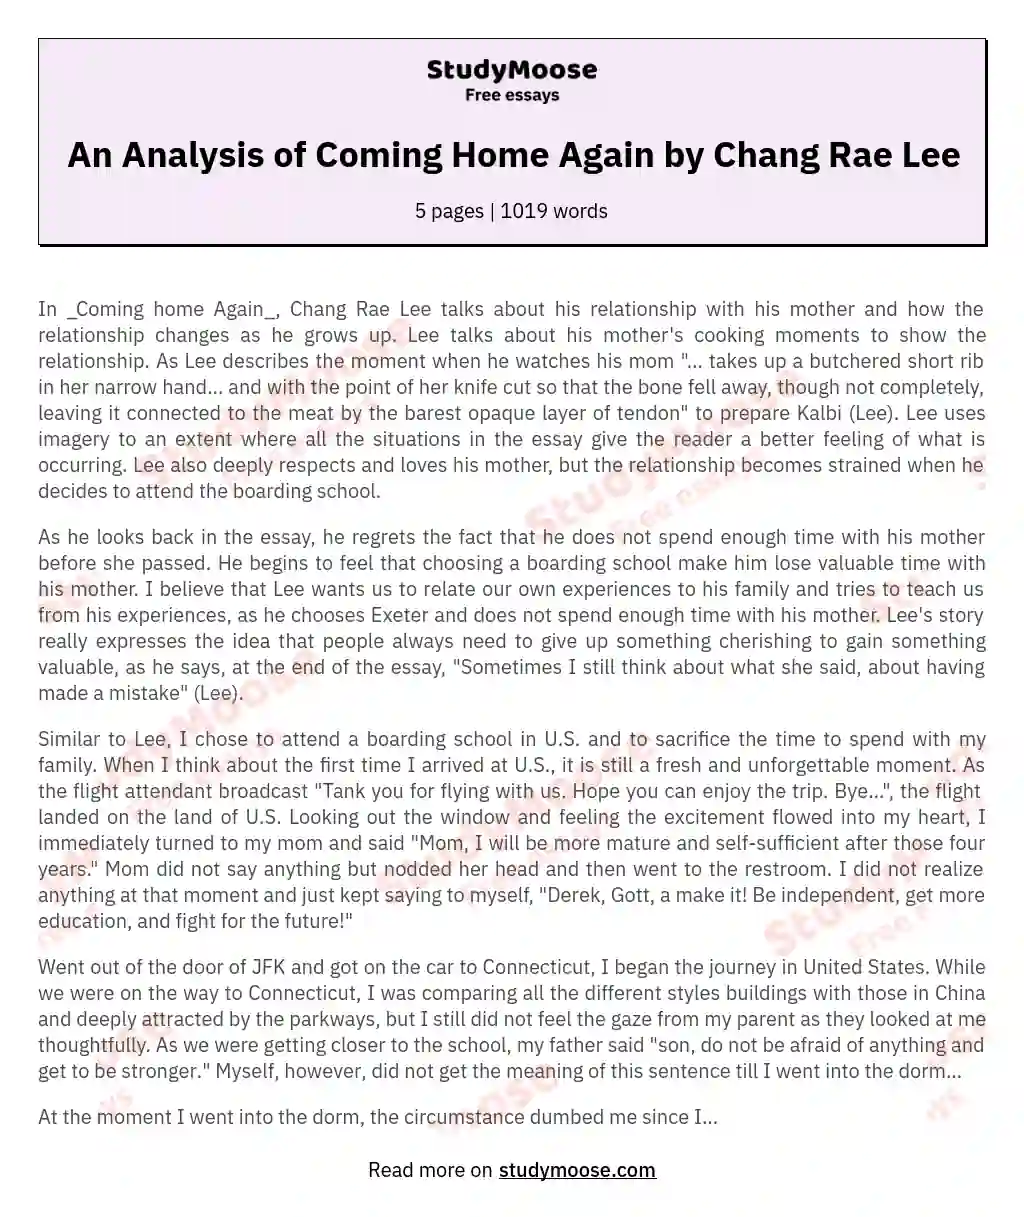 An Analysis of Coming Home Again by Chang Rae Lee essay